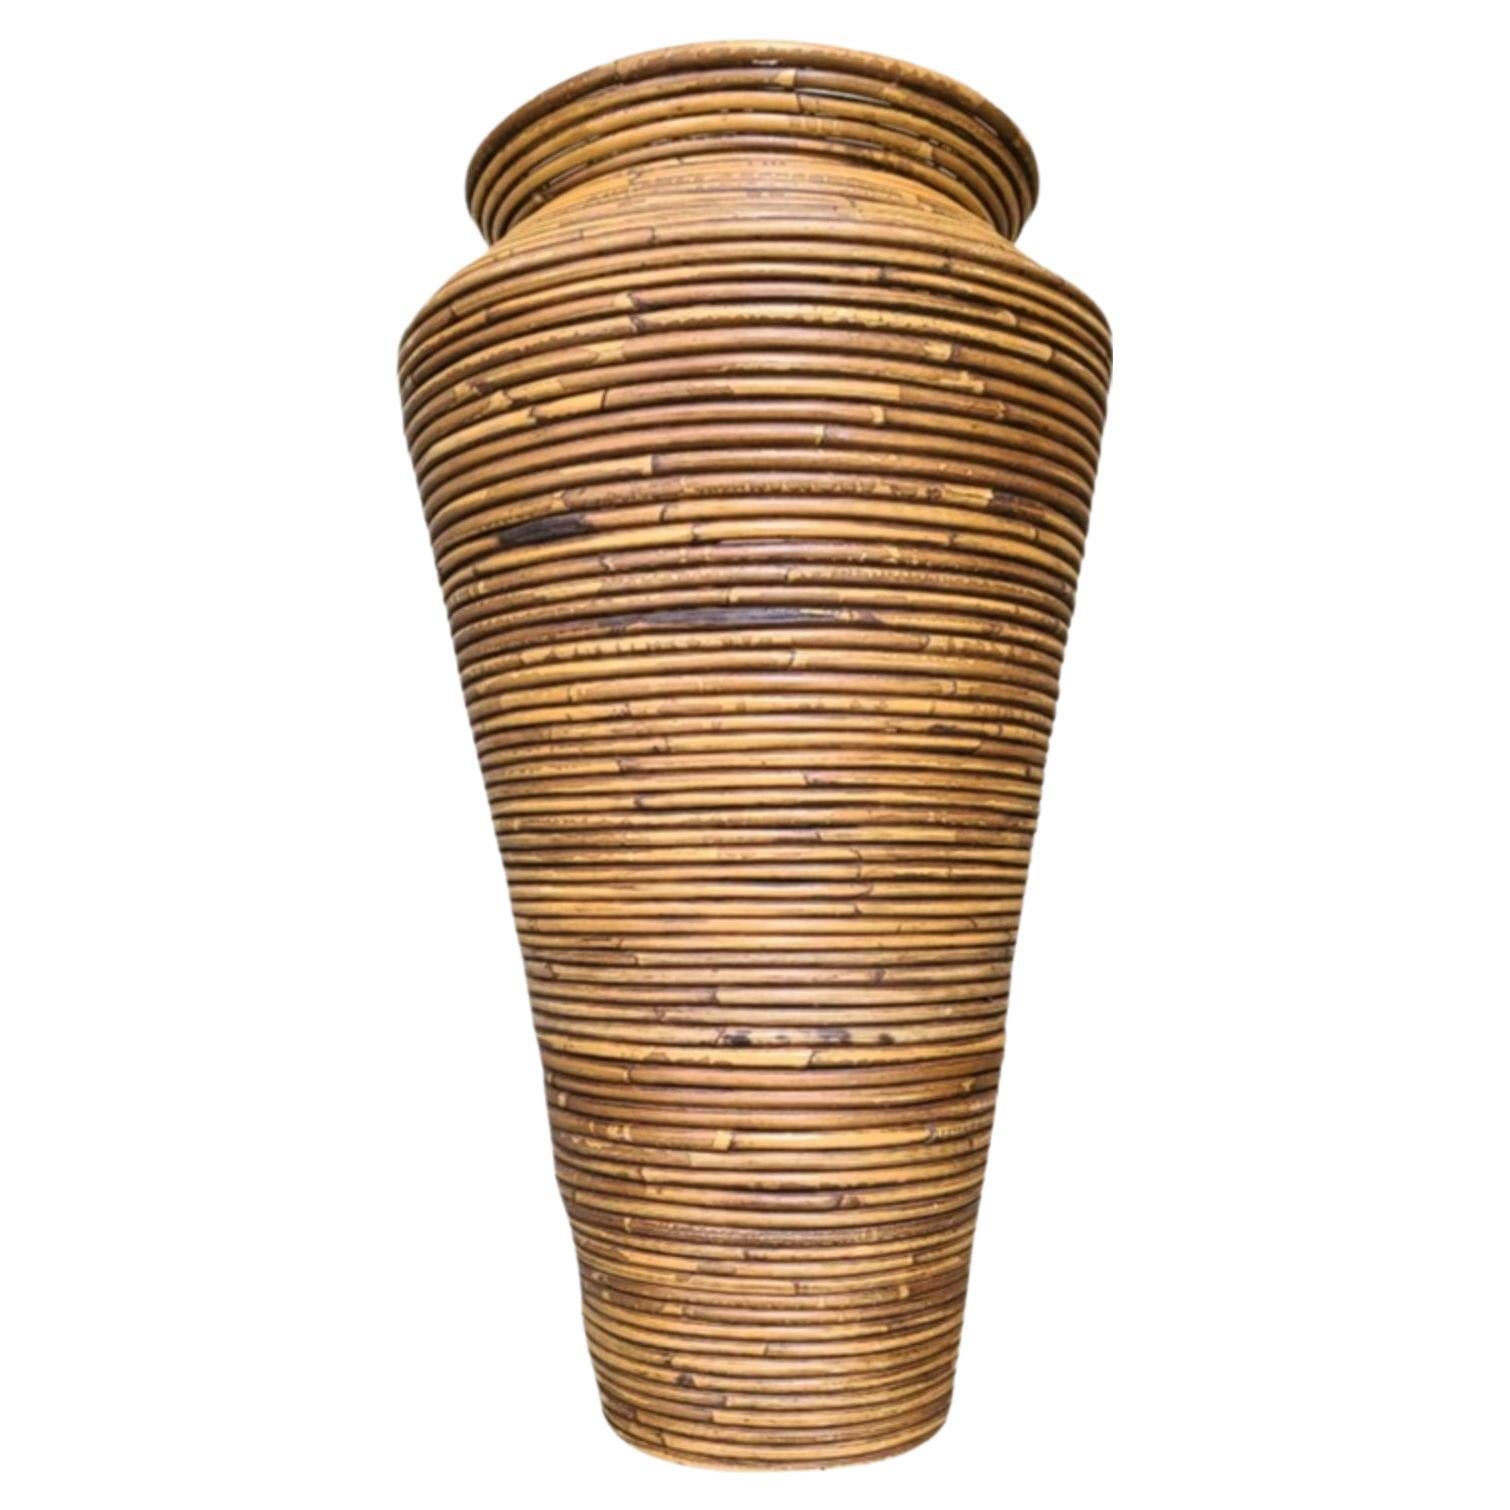 Large 2' Gabriella Crespi Styled Stacked Pencil Reed Rattan Floor Vase